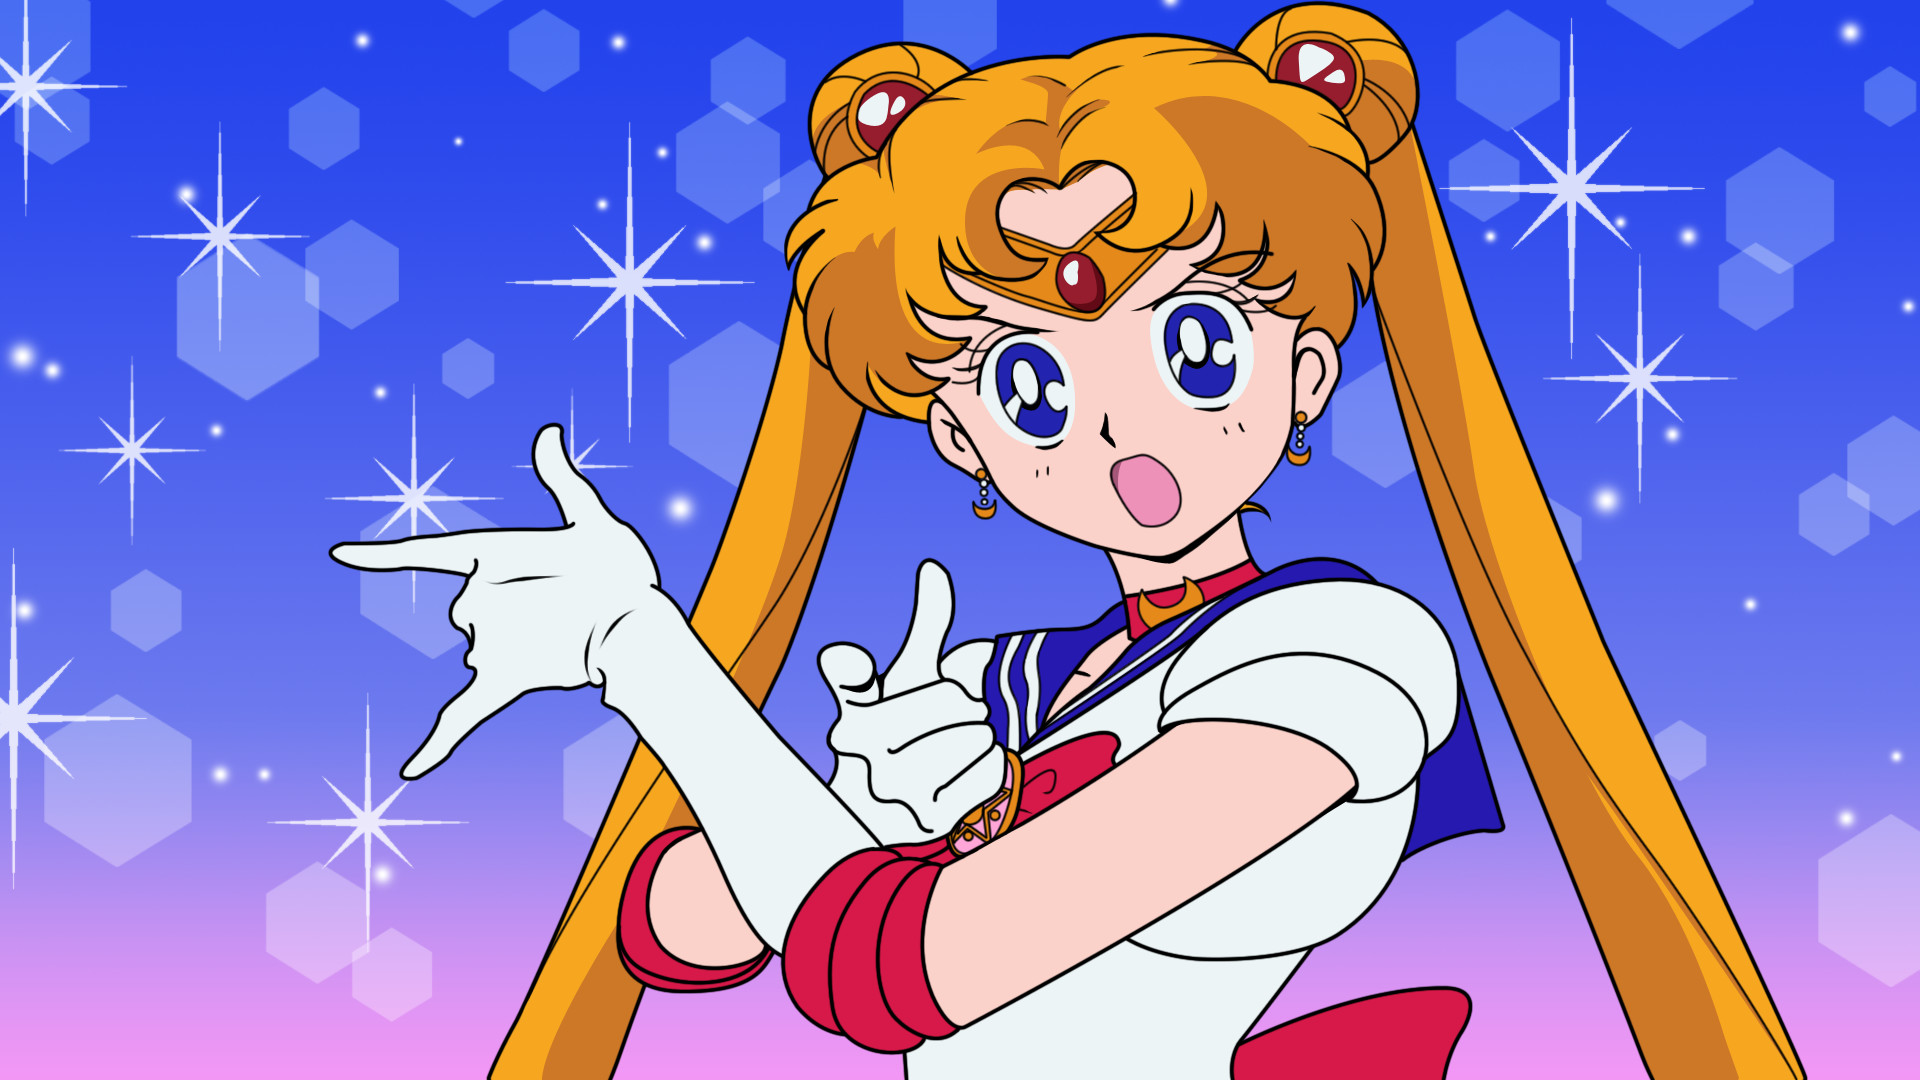 1920x1080 Sailor Moon Full HD Wallpaper http://wallpapers-and-backgrounds.net